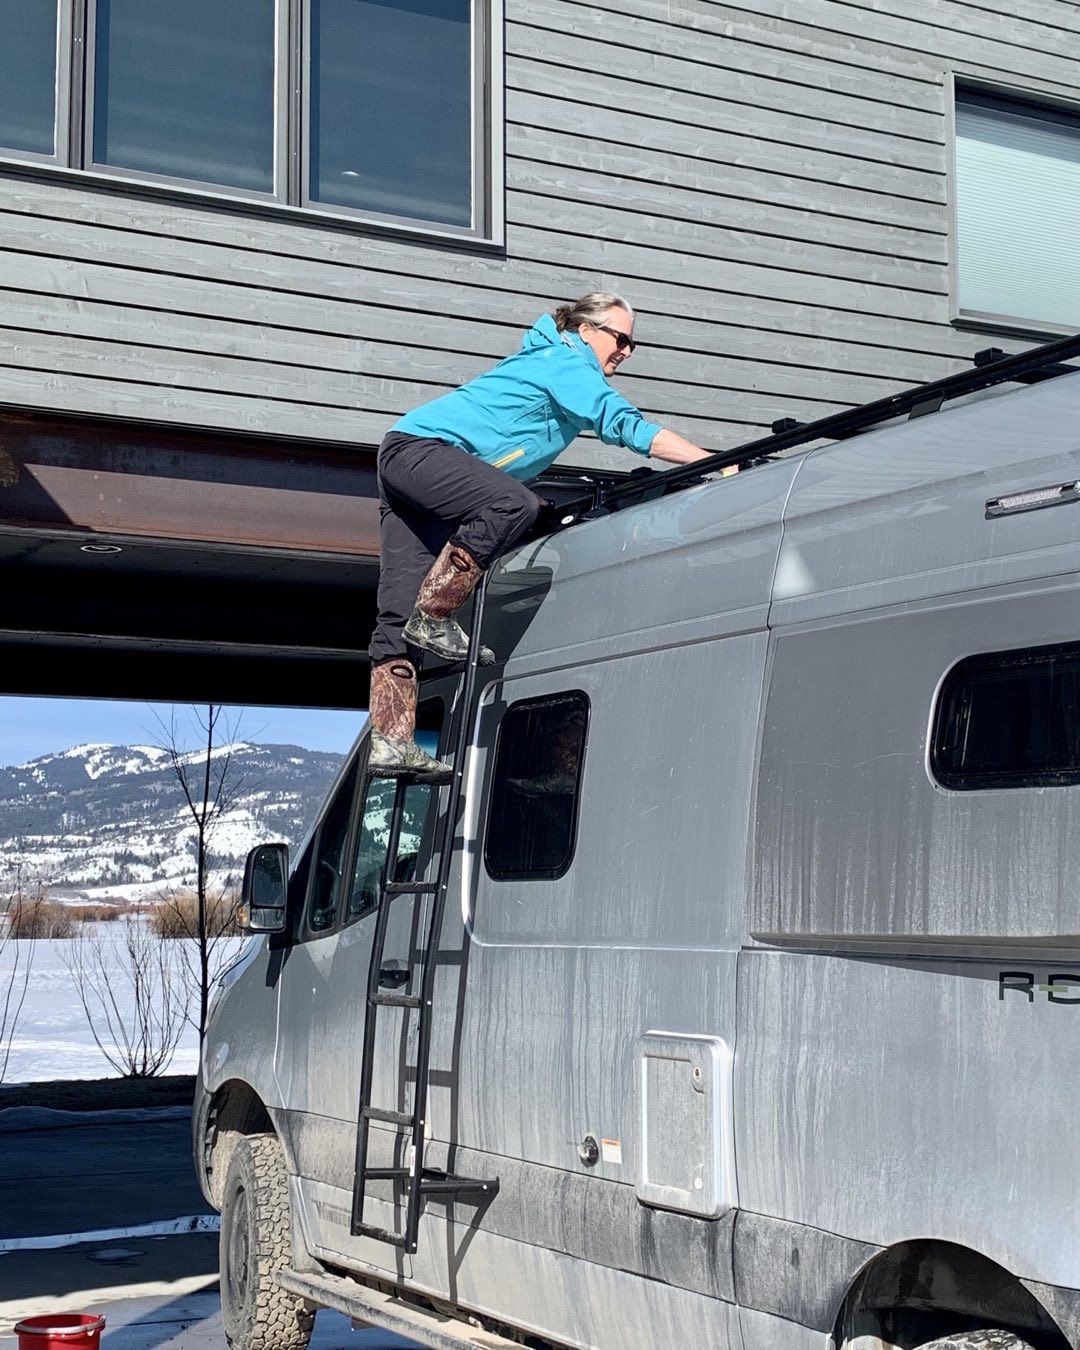 Cindy Orcutt cleaning off solar panels as we prepare for the trip back to Maine from eastern Idaho. We are leaving tomorrow morning after a grand stay of three and a half months in Teton Valley with side trips to extraordinary places here in the mountain west! Expect to be home by mid-April. #tetonvalleyidaho #vanlife #revelsprintervan #victoridaho #orcuttphitography.com #tripbacktomaine #opwagon #bestofthegemstate